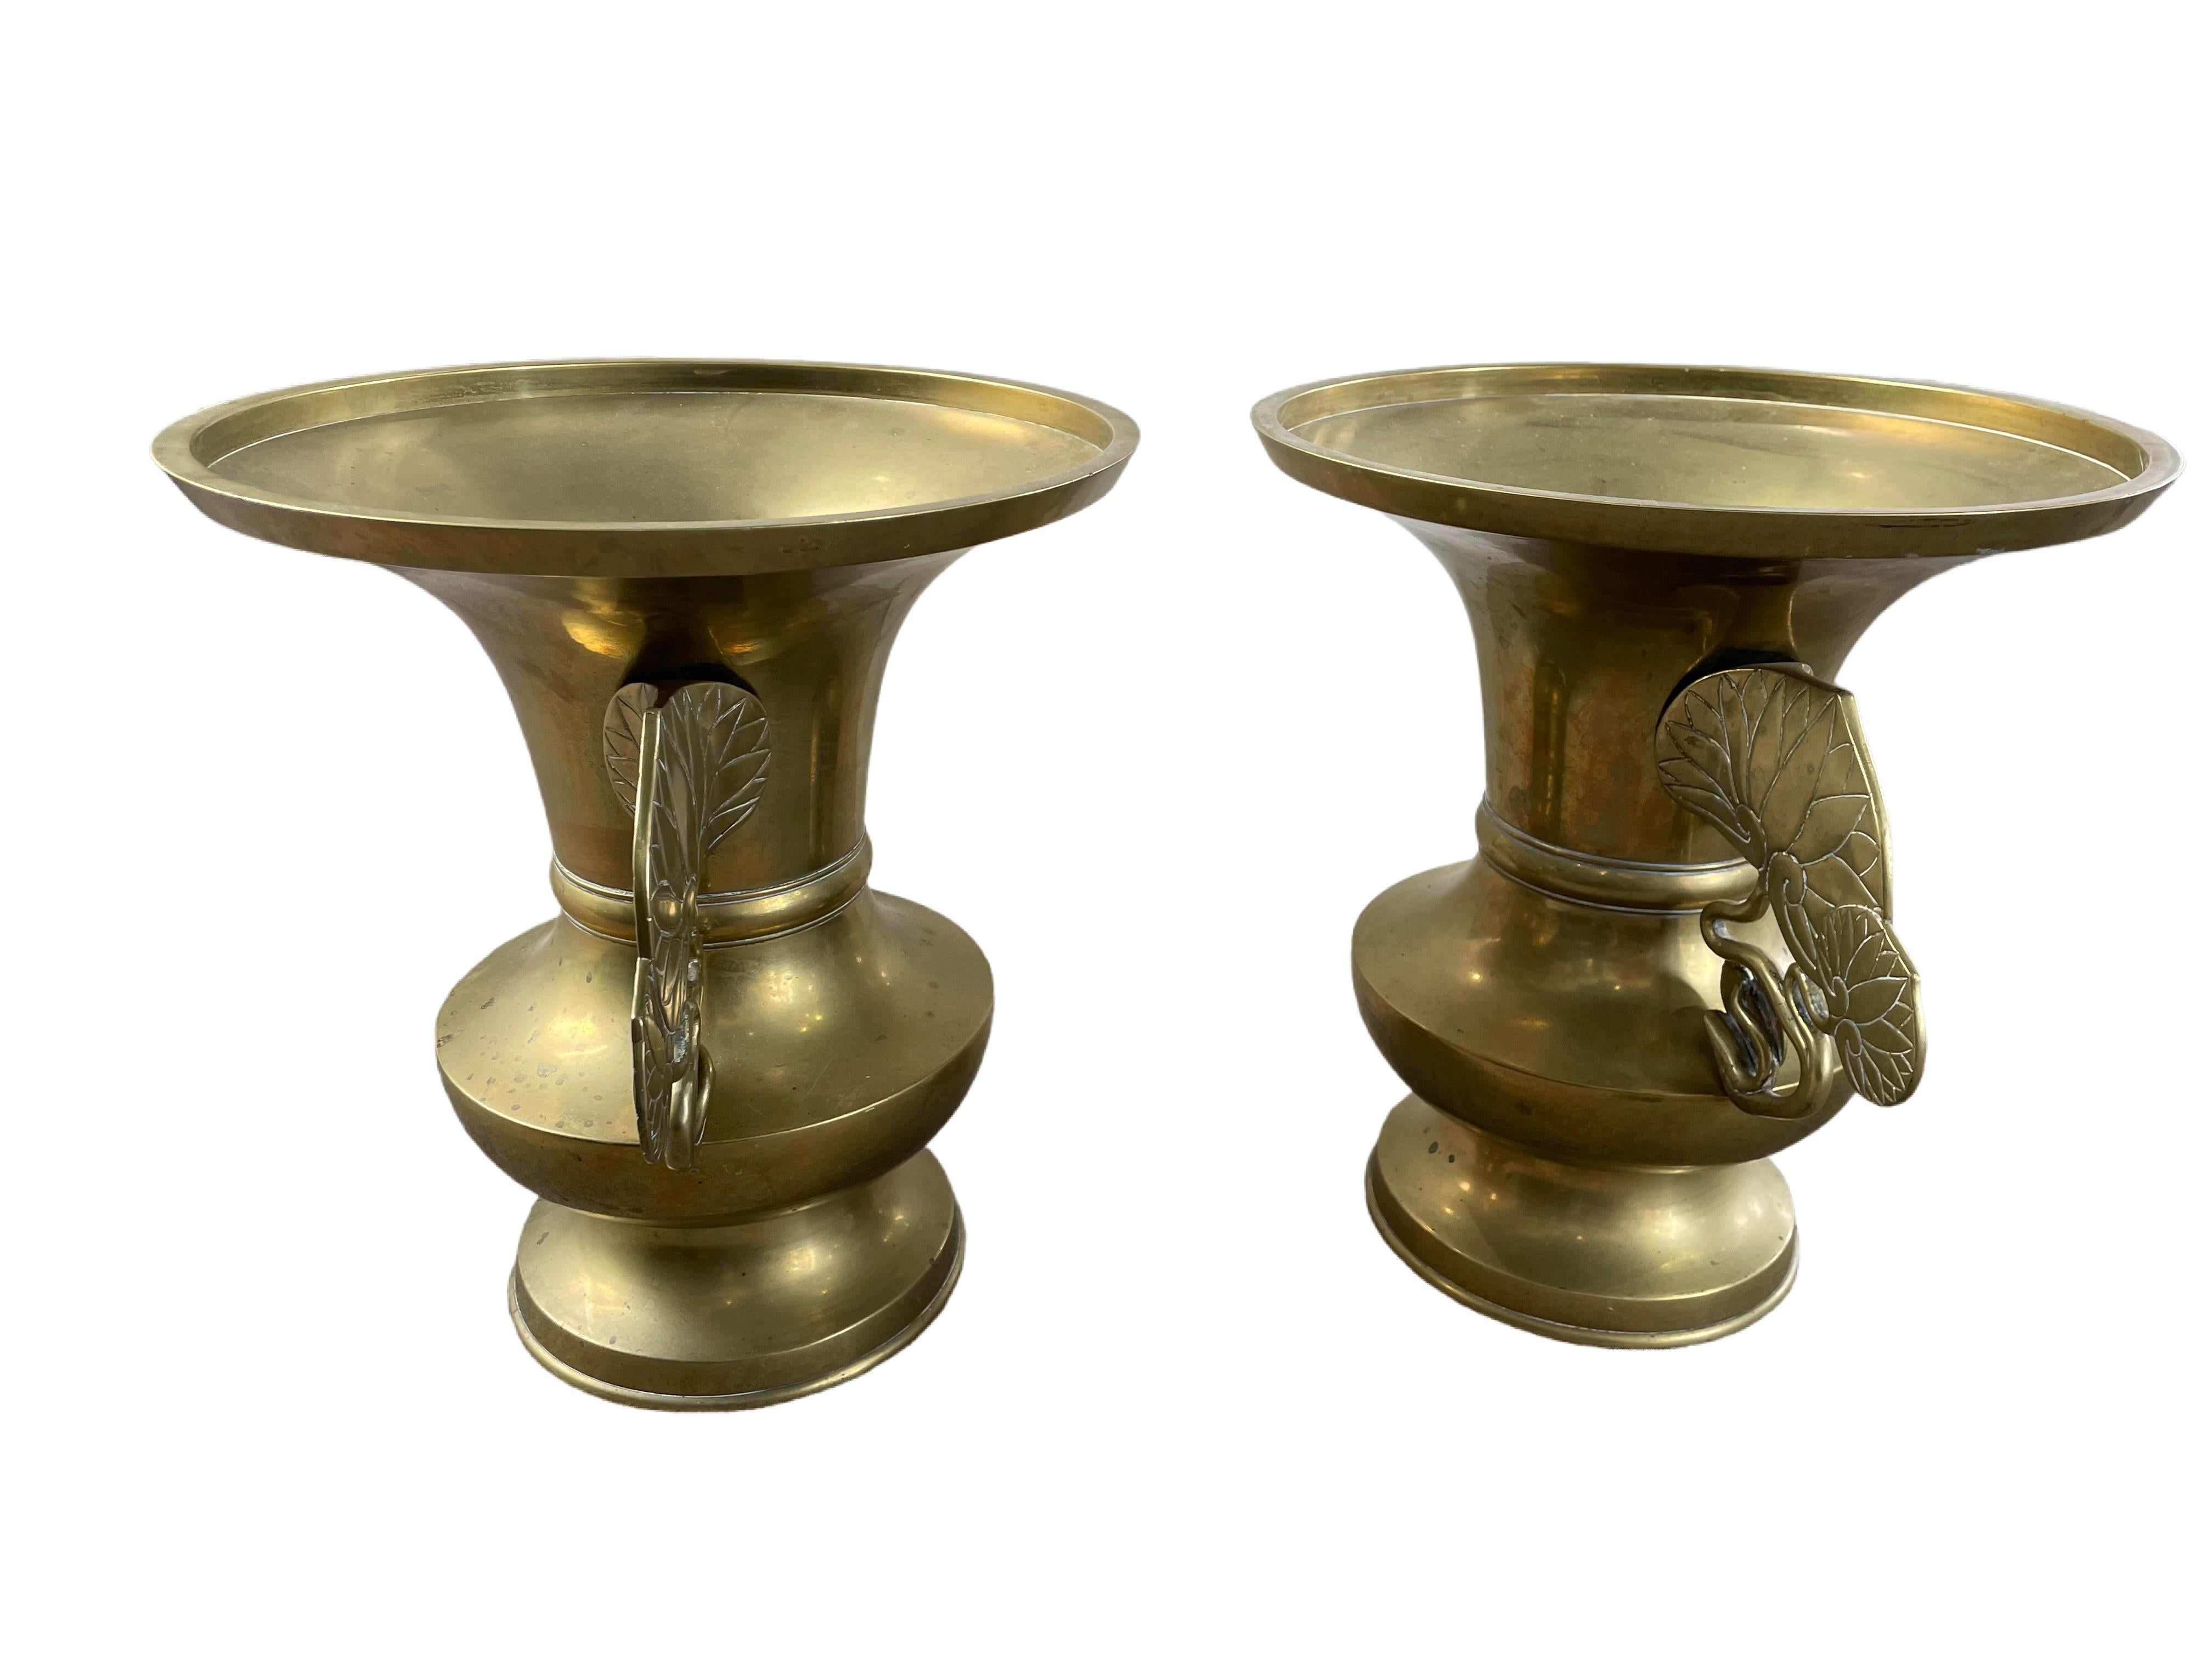 Exquisite brass vases with removable hand-forged handles in an intricate leaf design, A blend of elegance and nature's beauty